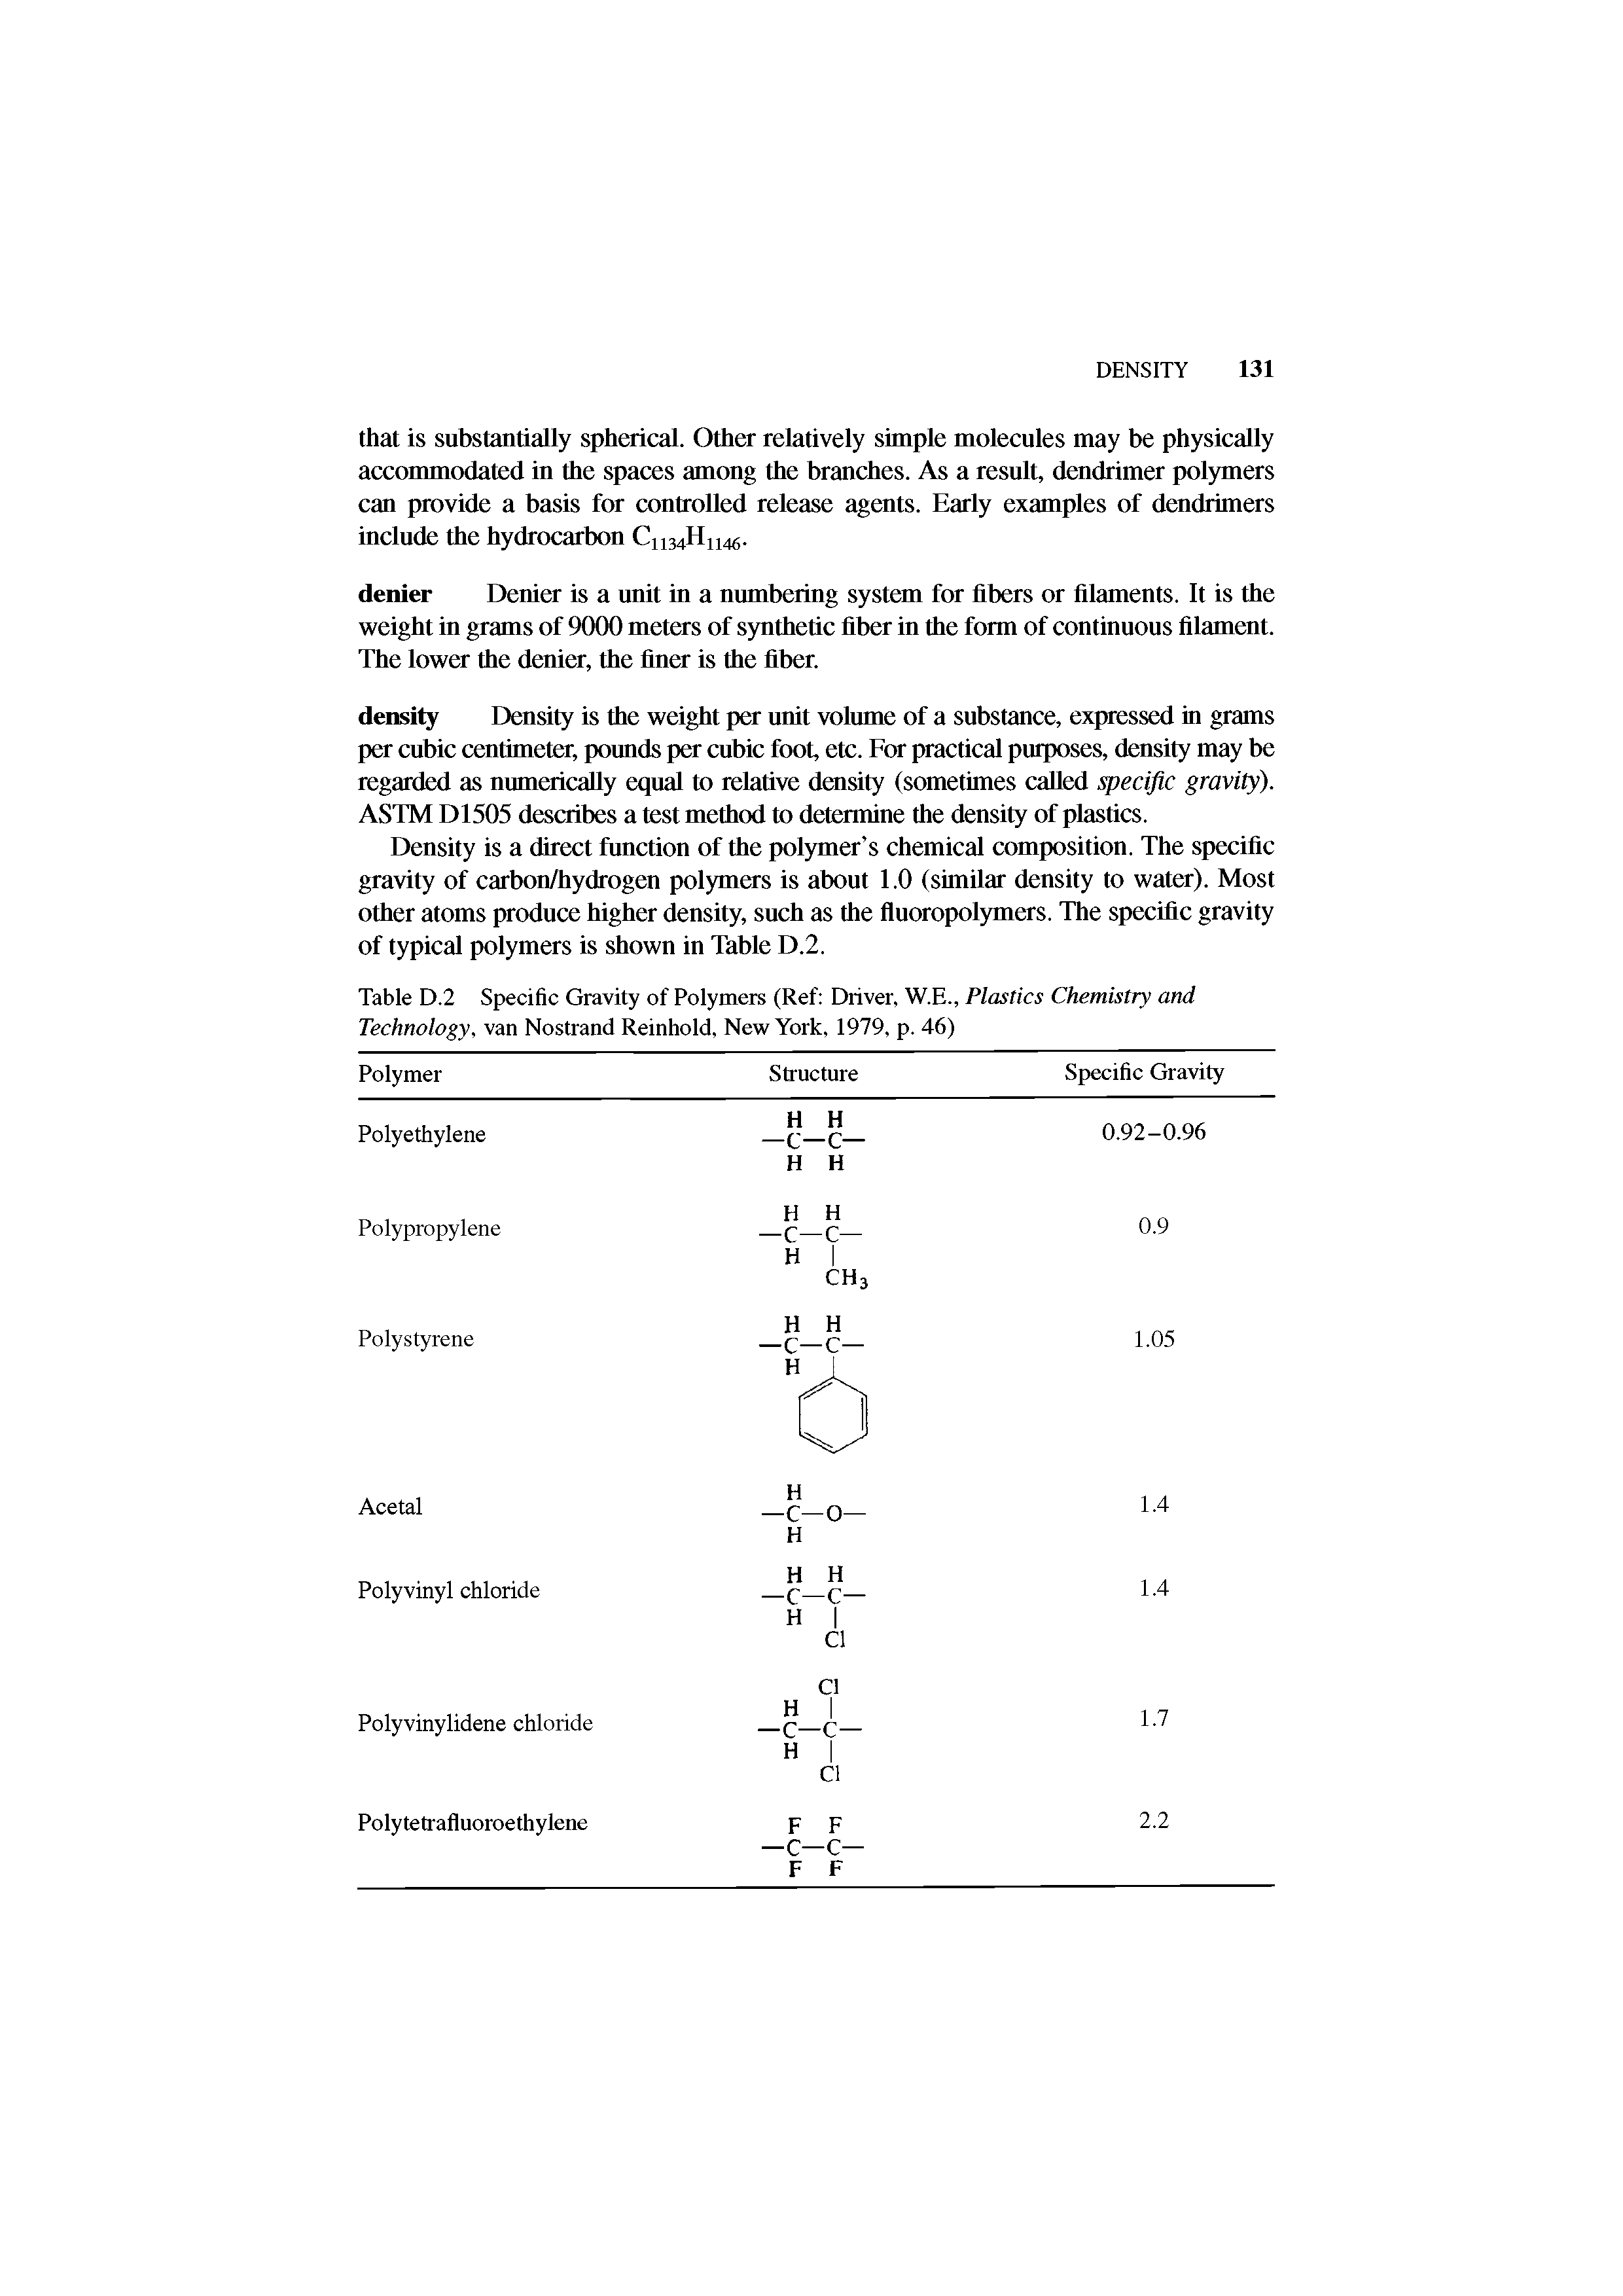 Table D.2 Specific Gravity of Polymers (Ref Driver, W.E., Plastics Chemistry and Technology, van Nostrand Reinhold, New York, 1979, p. 46)...